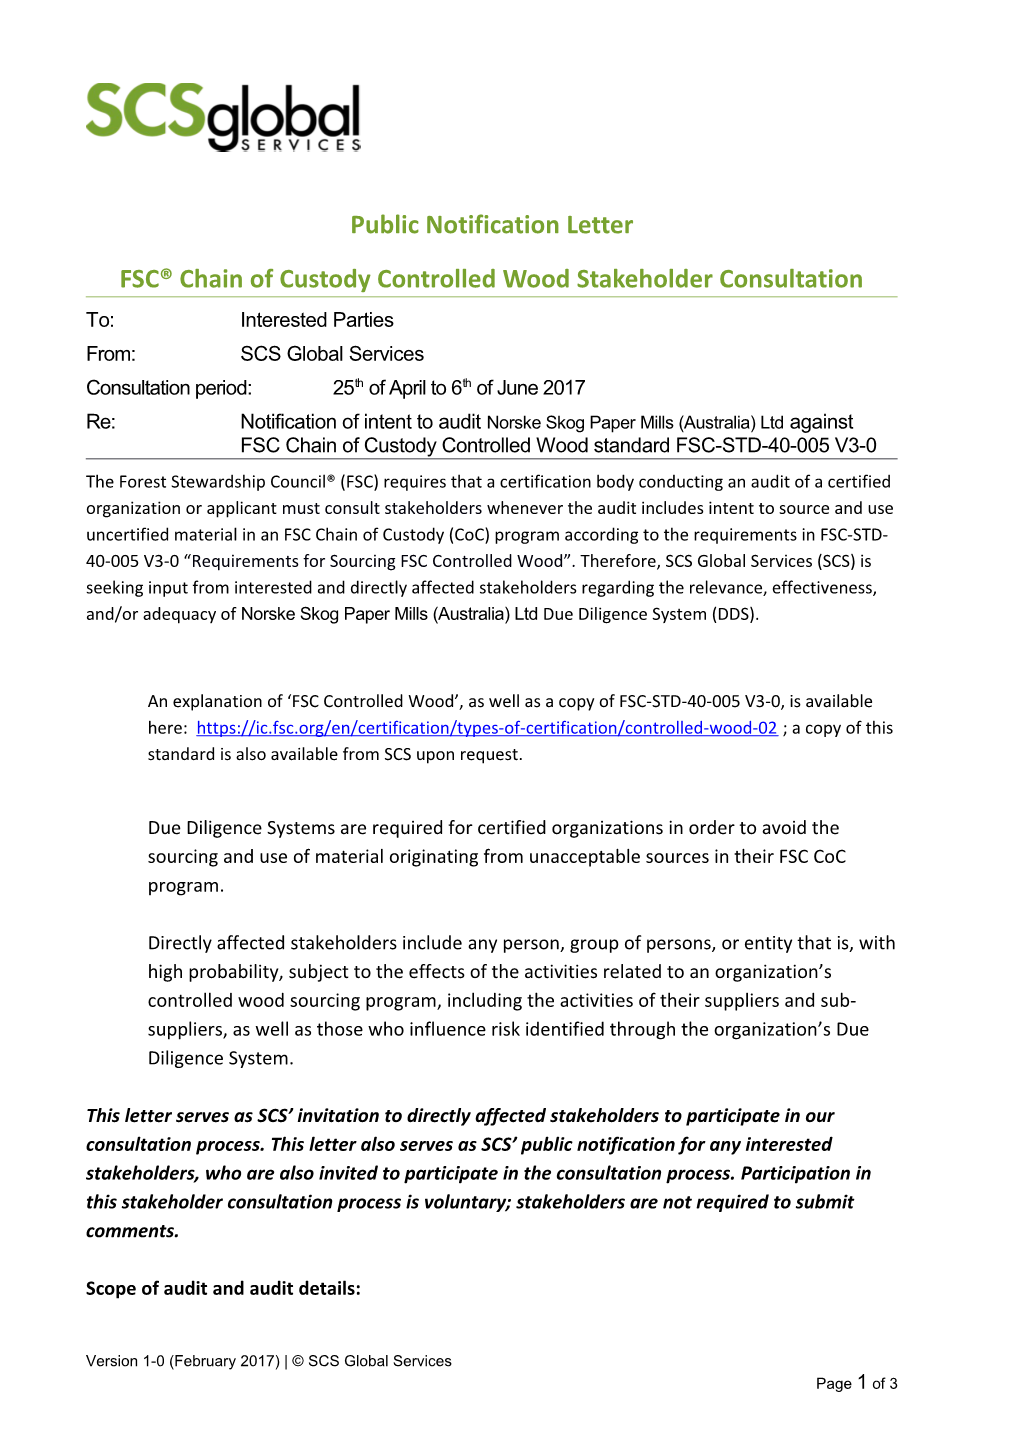 FSC Chain of Custody Controlled Wood Stakeholder Consultation